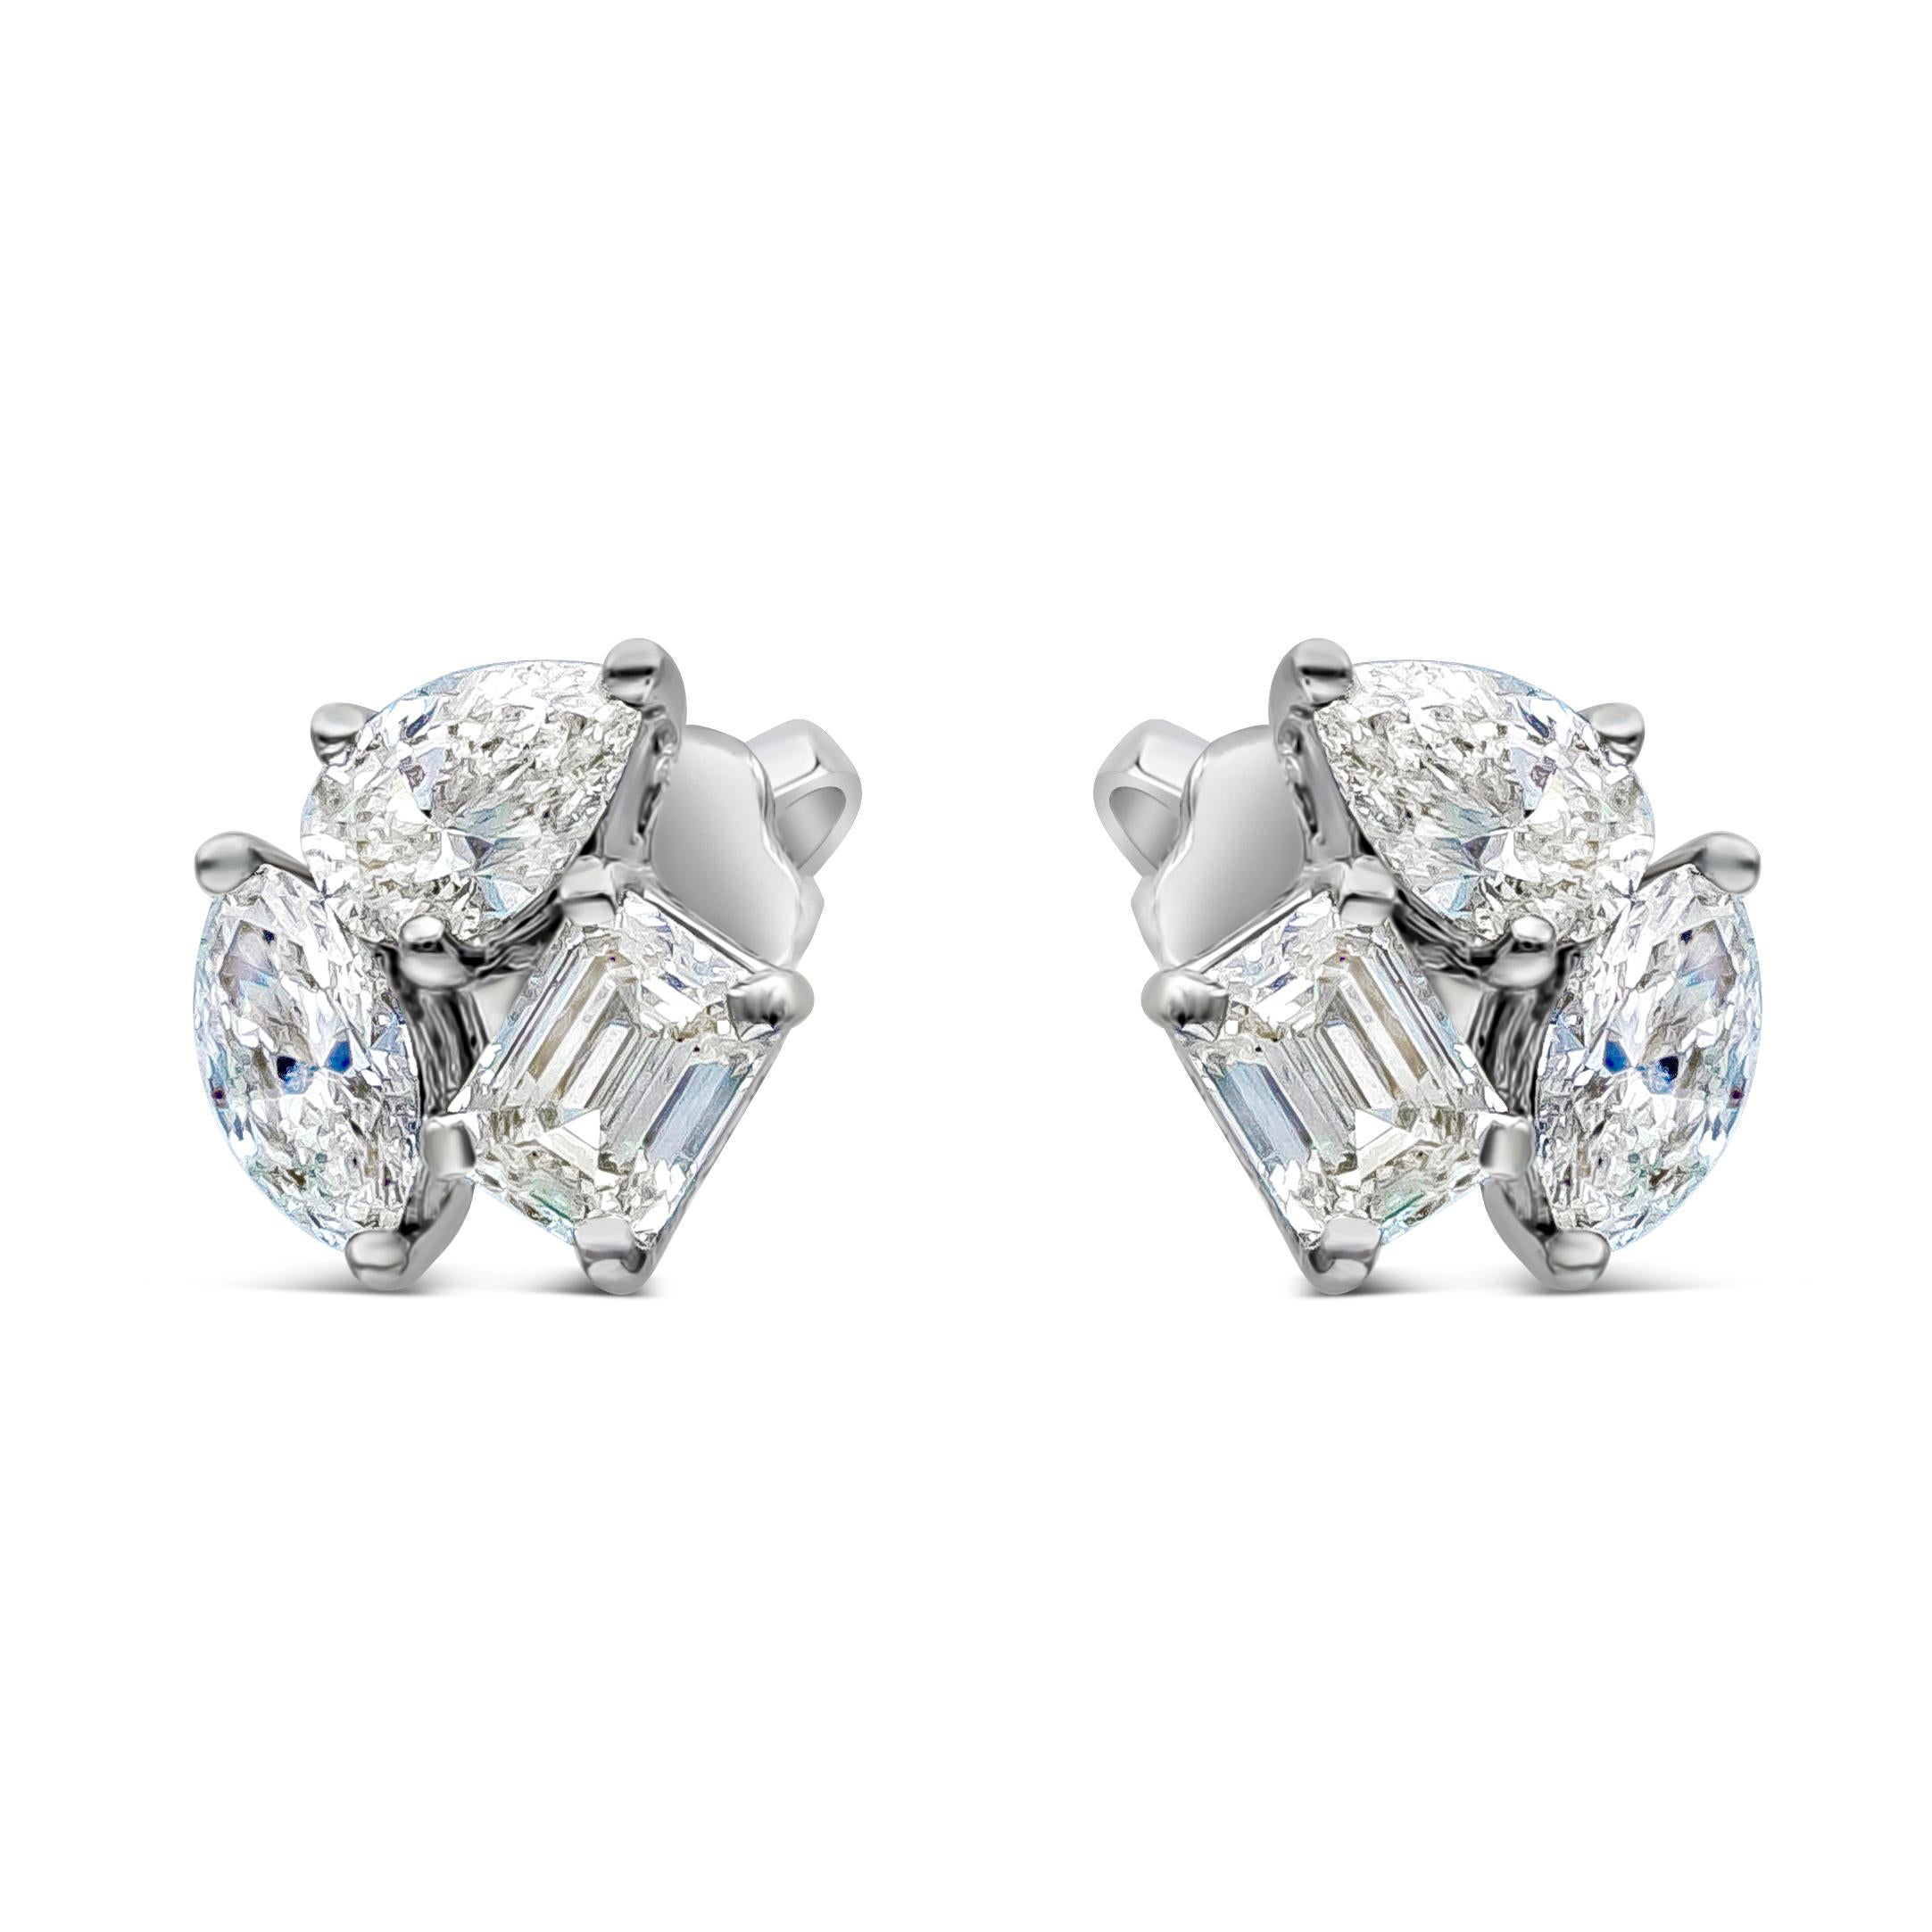 A beautiful three stone stud earrings showcasing marquise, pear and emerald cut white diamonds weighing 1.16 carats total, G-H color and SI in Clarity. Made in 18K White Gold.

Roman Malakov is a custom house, specializing in creating anything you